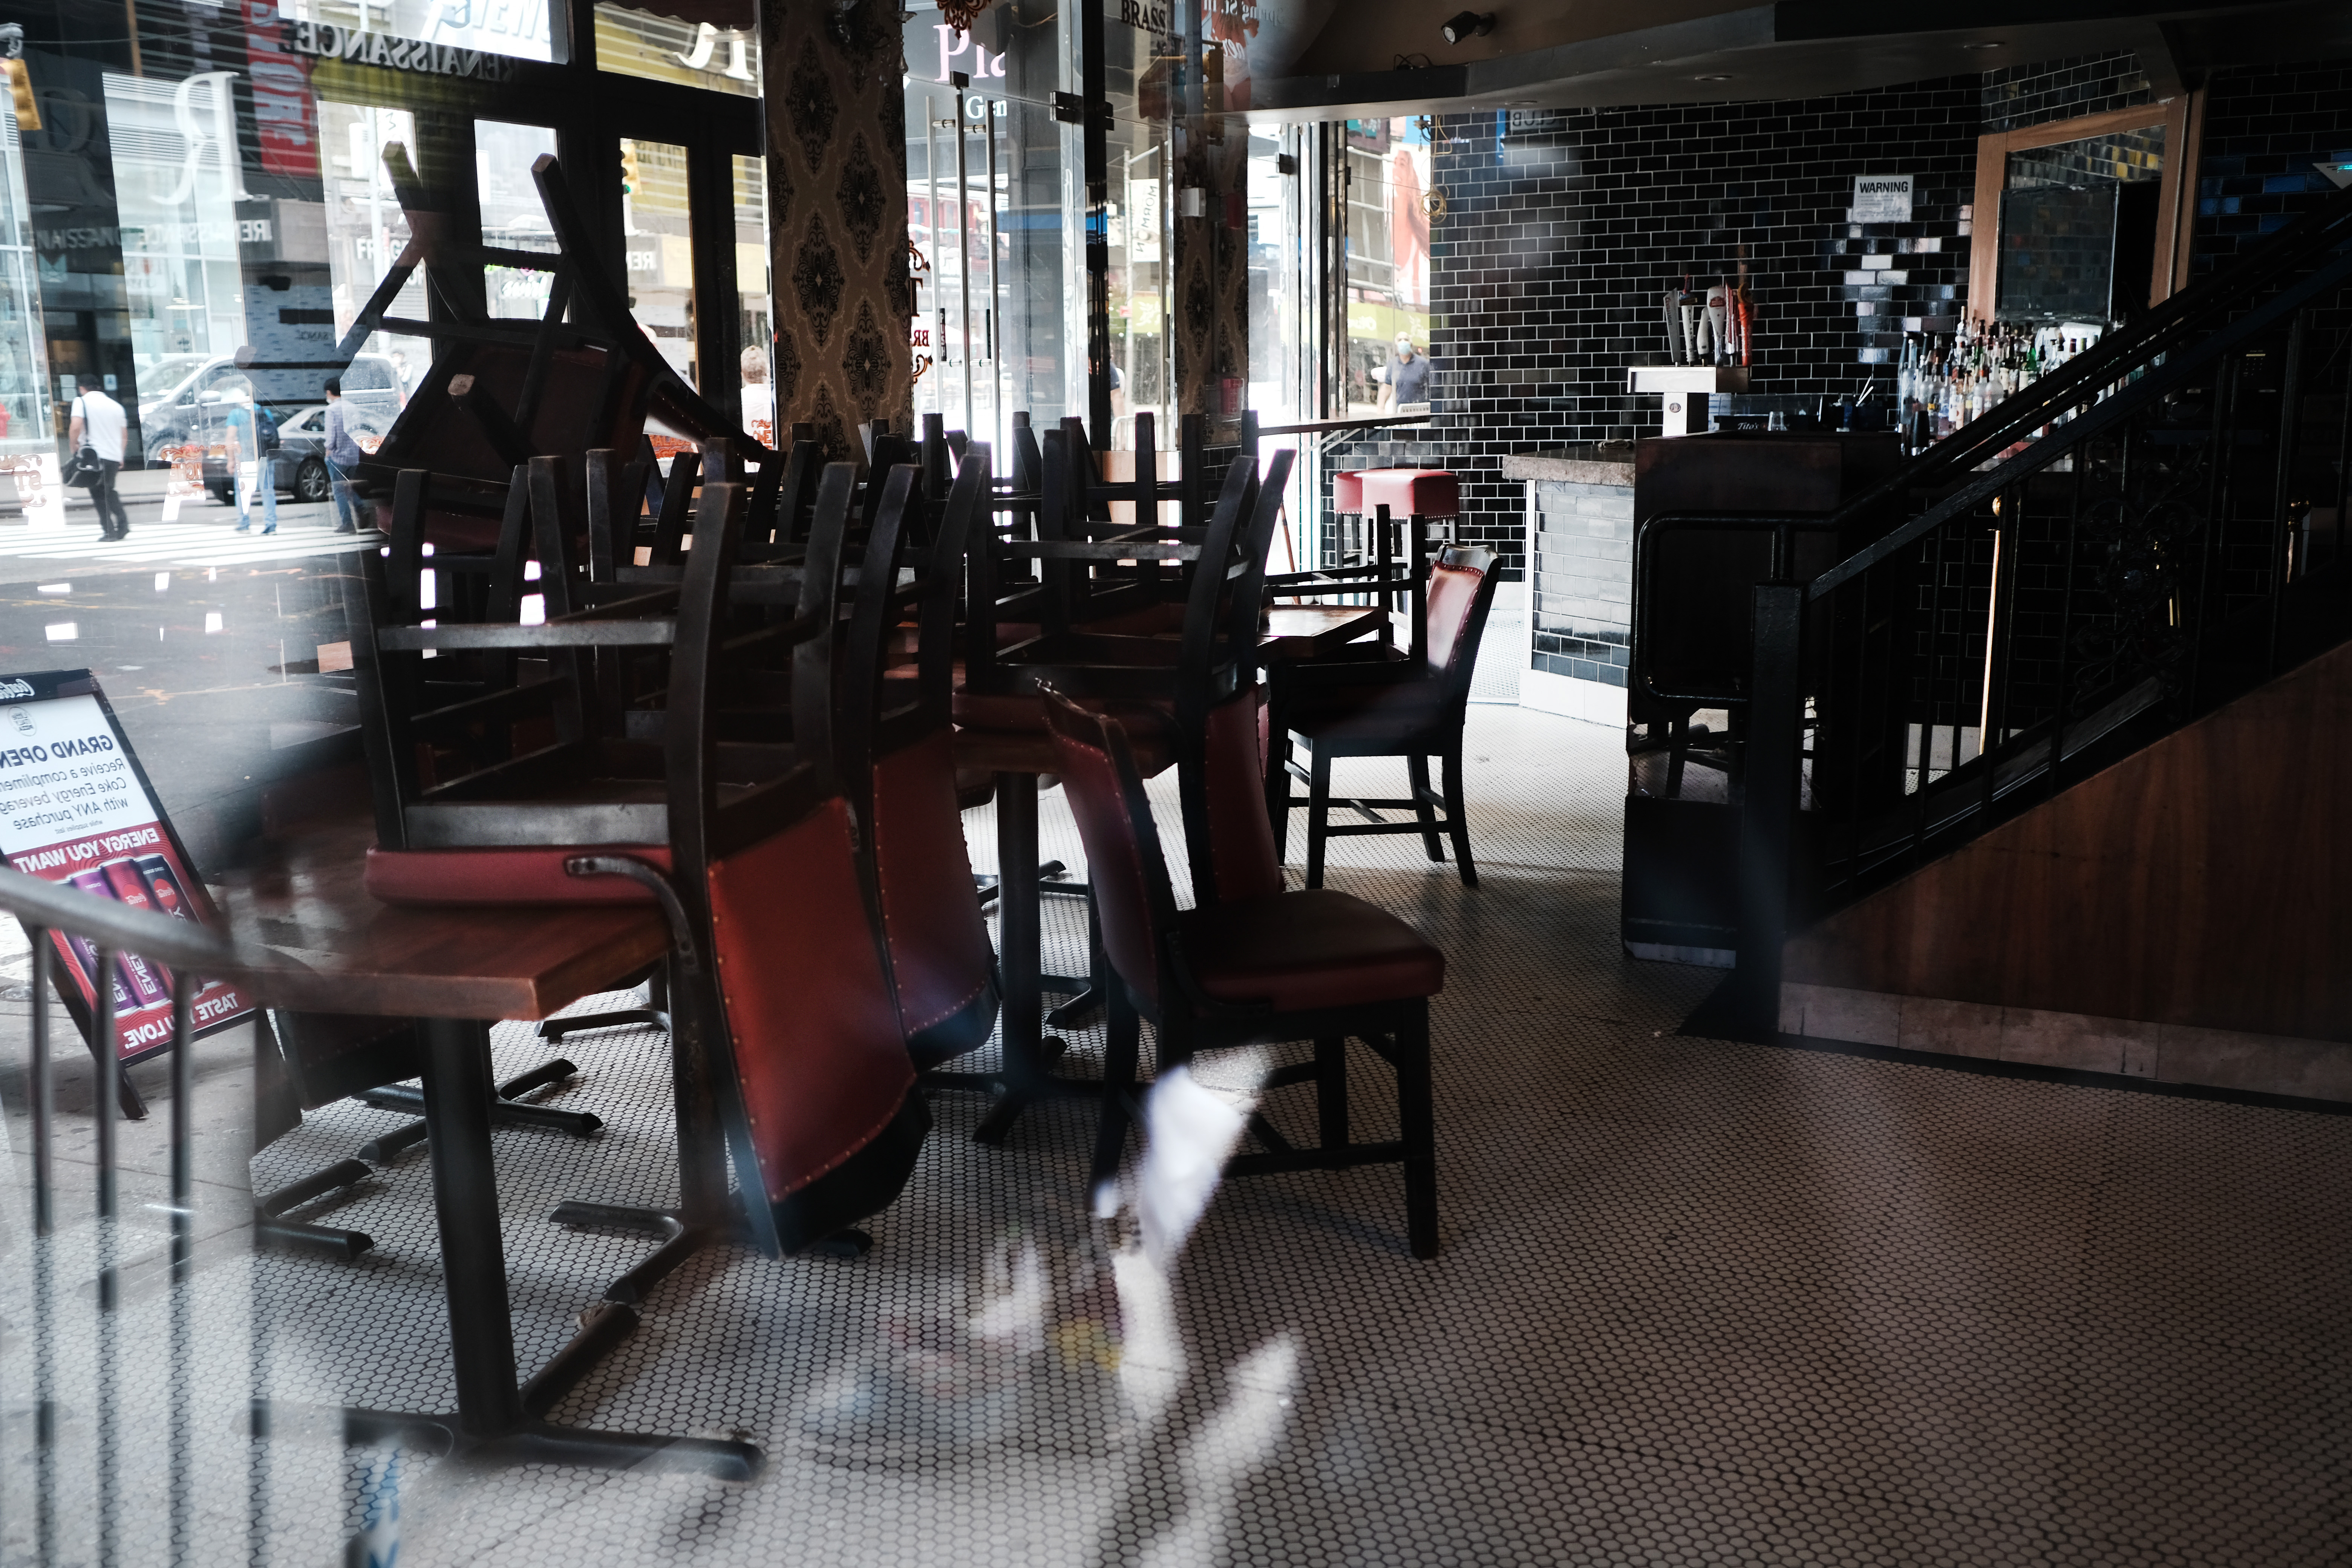 Chairs piled up on indoor tables at a restaurant.